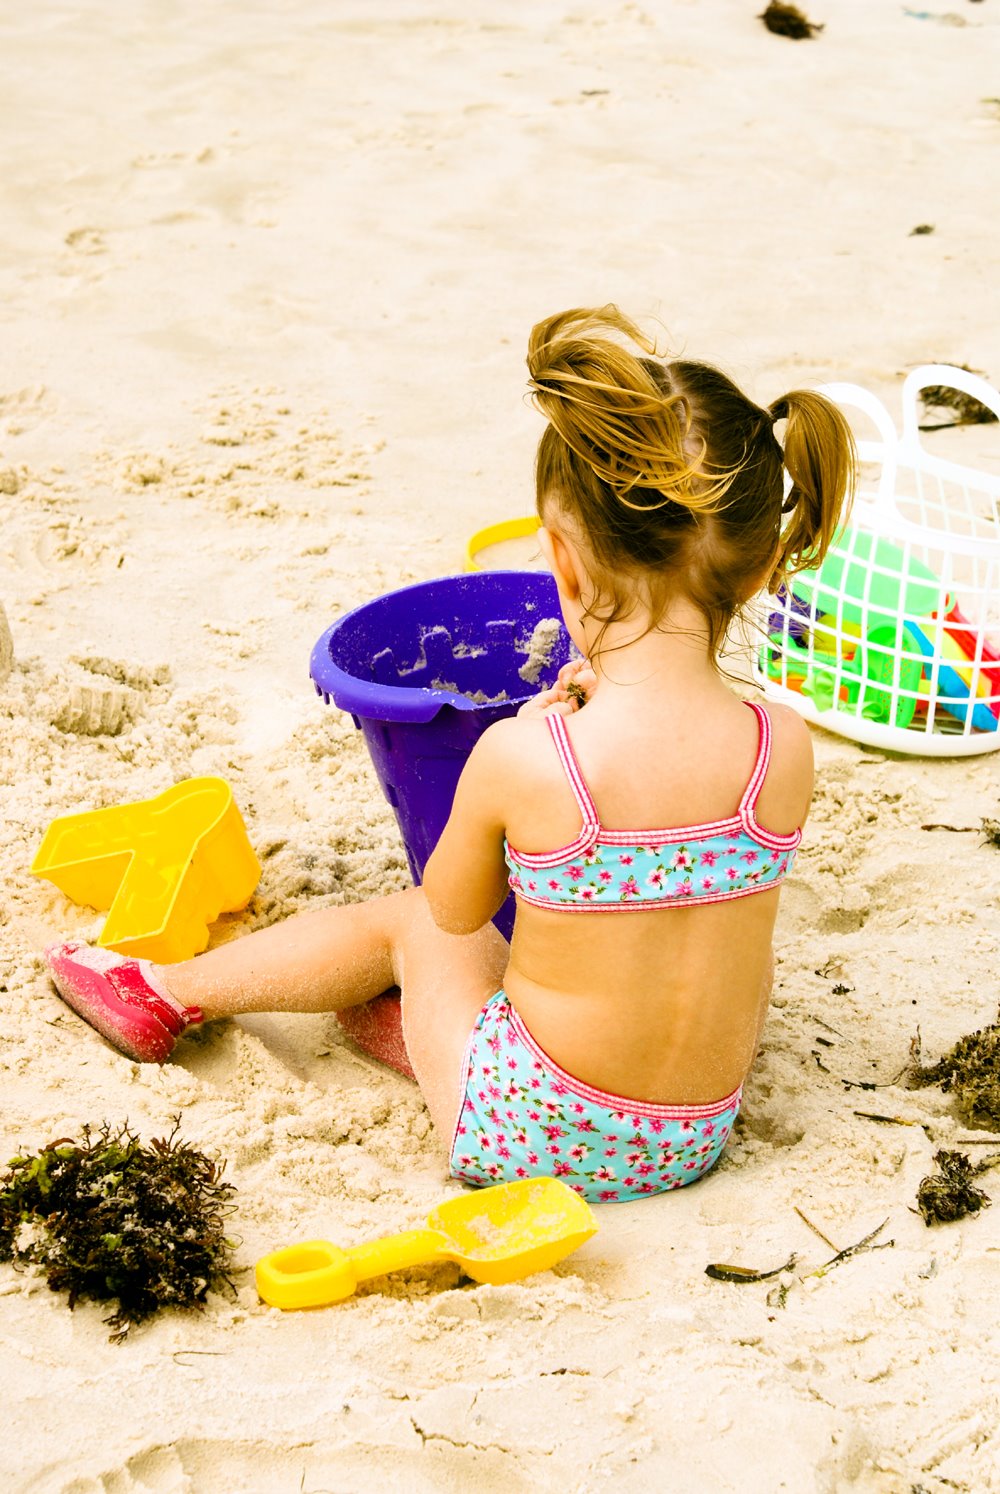 [Maddie+playing+in+the+sand.jpg]